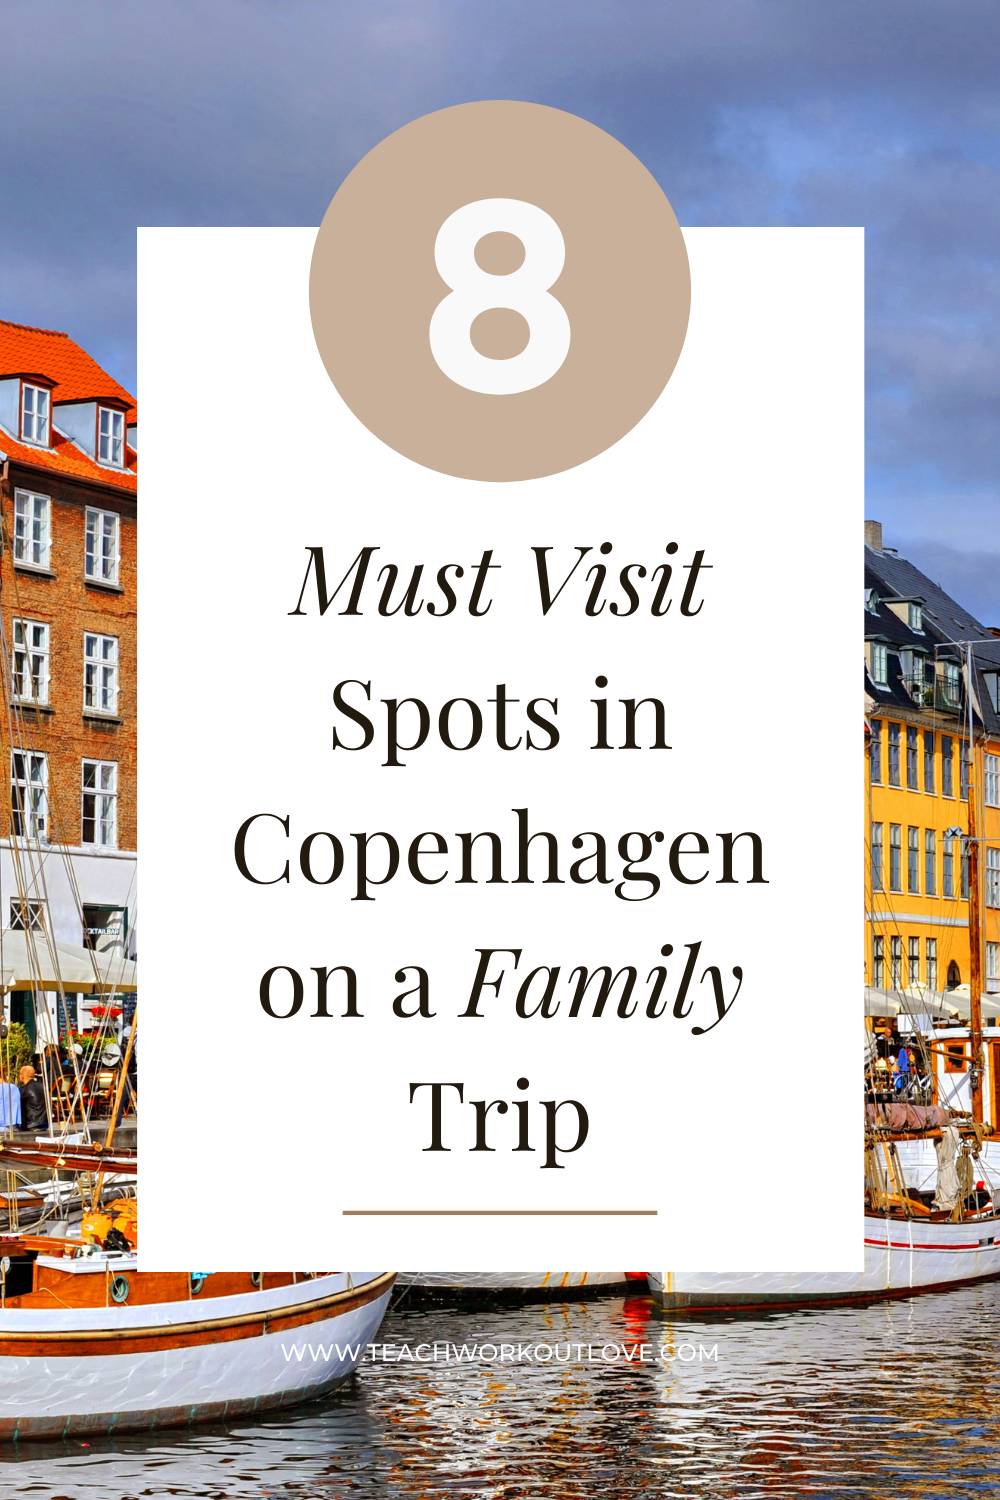 Want to travel somewhere with your family this year? Start planning your trip to Copenhagen for a trip of a lifetime! Here's the details.